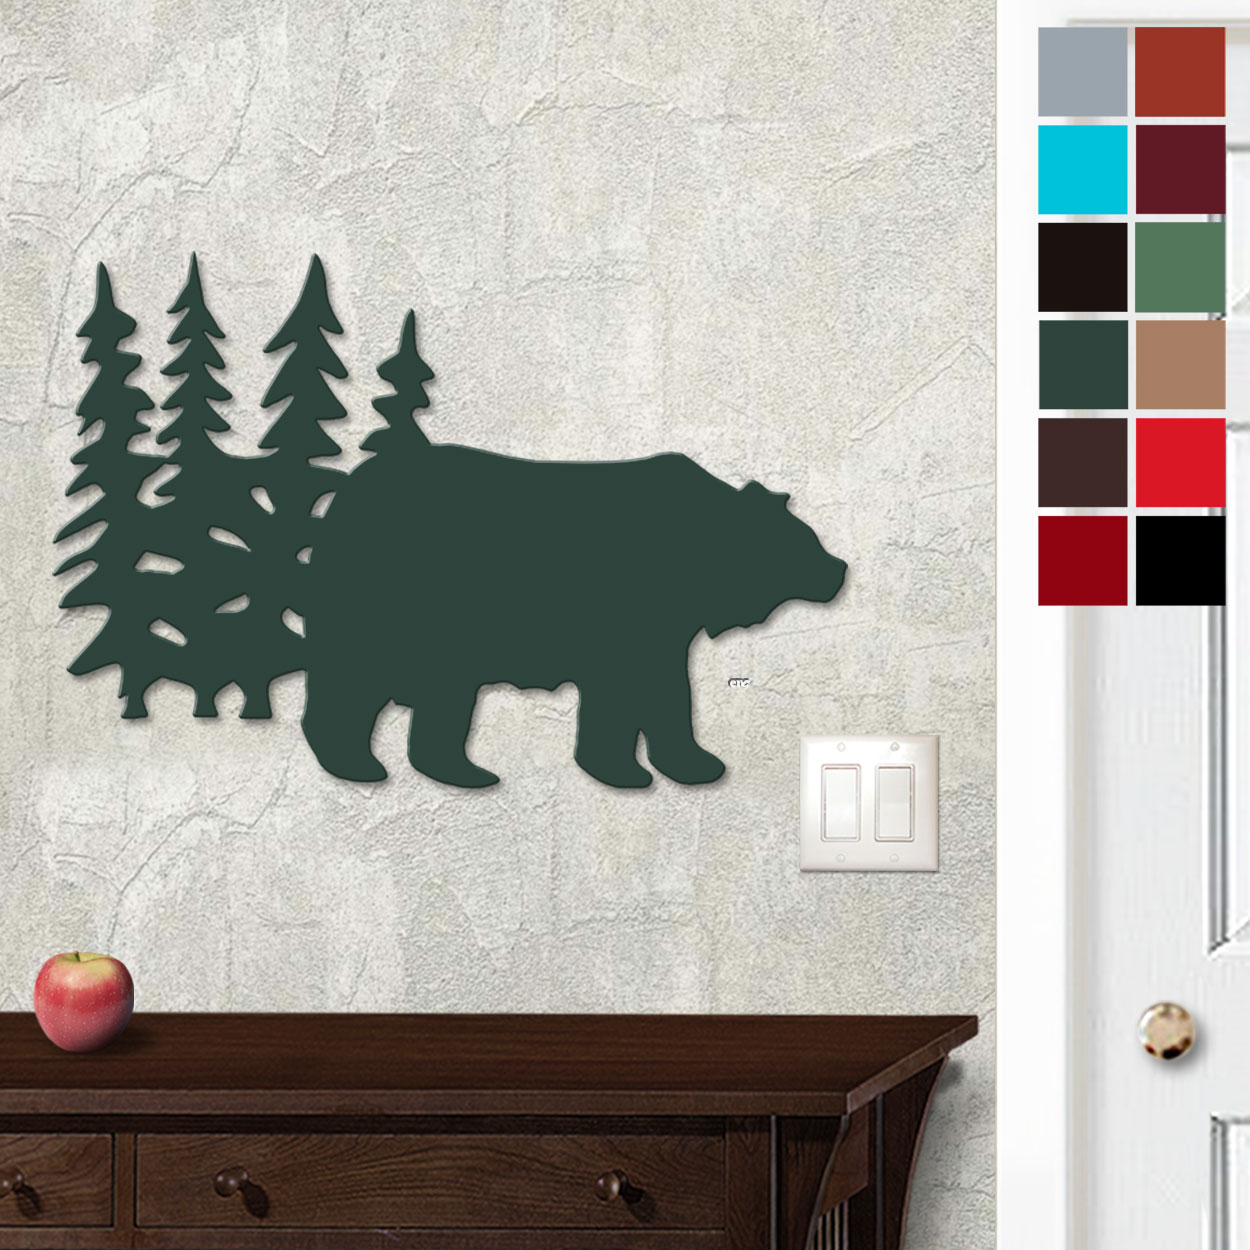 625004 - 18in or 24in Floating Metal Wall Art - Bear And Trees - Choose Color